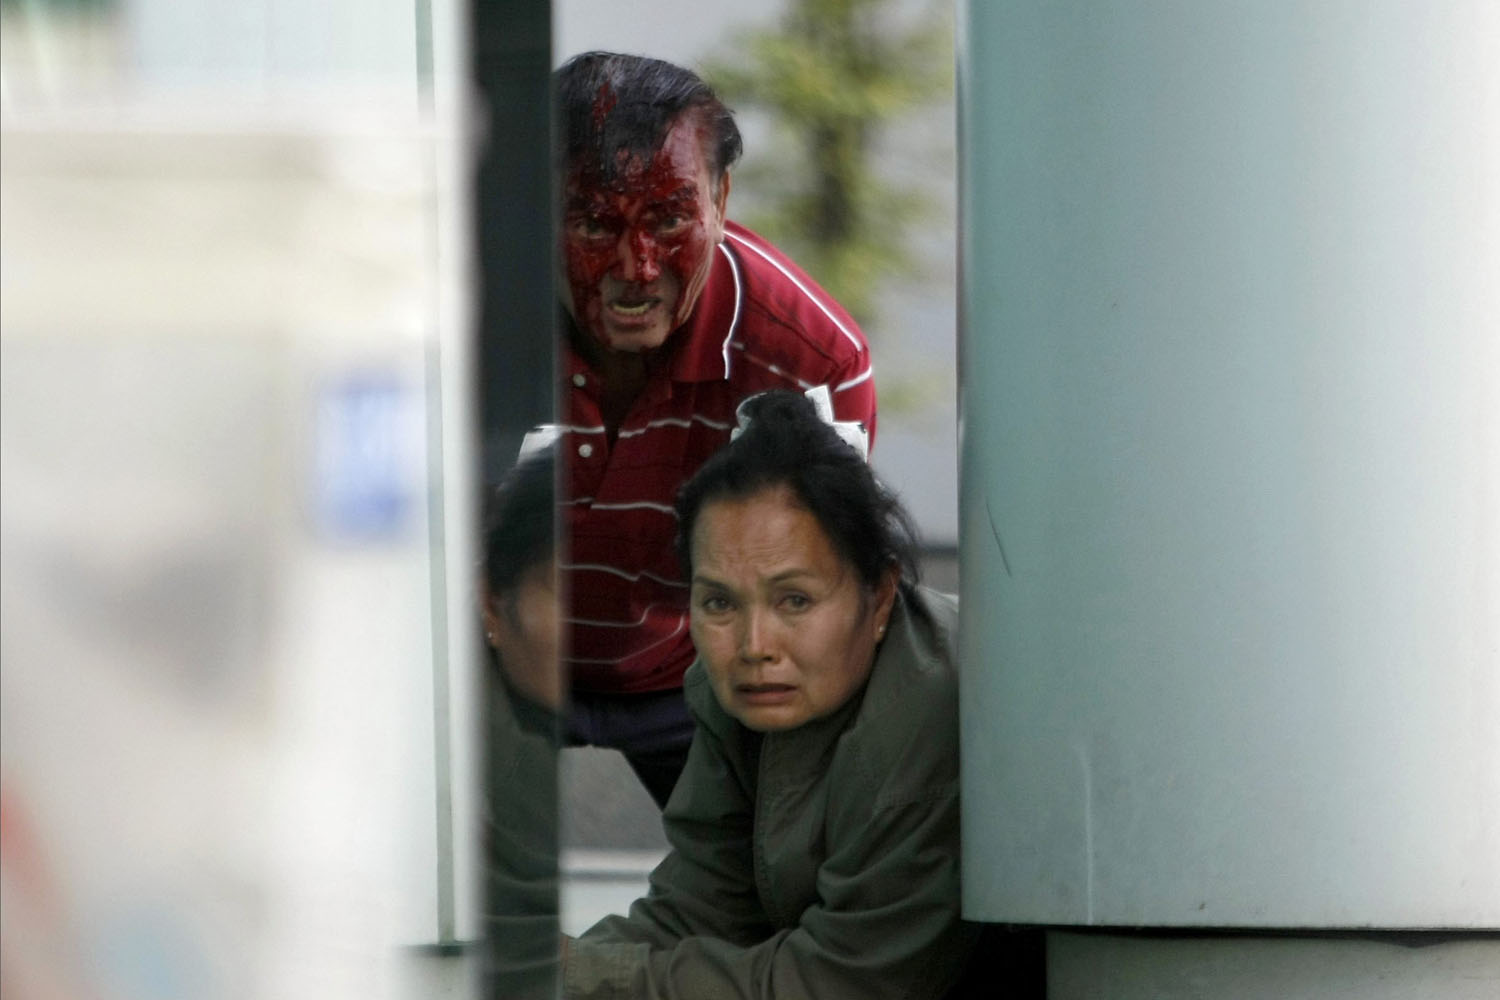 Feb. 1, 2014. A injured Thai man and a woman peer around a wall during a gun battle between anti-government protesters with government supporters near Lak Si district office in Bangkok.